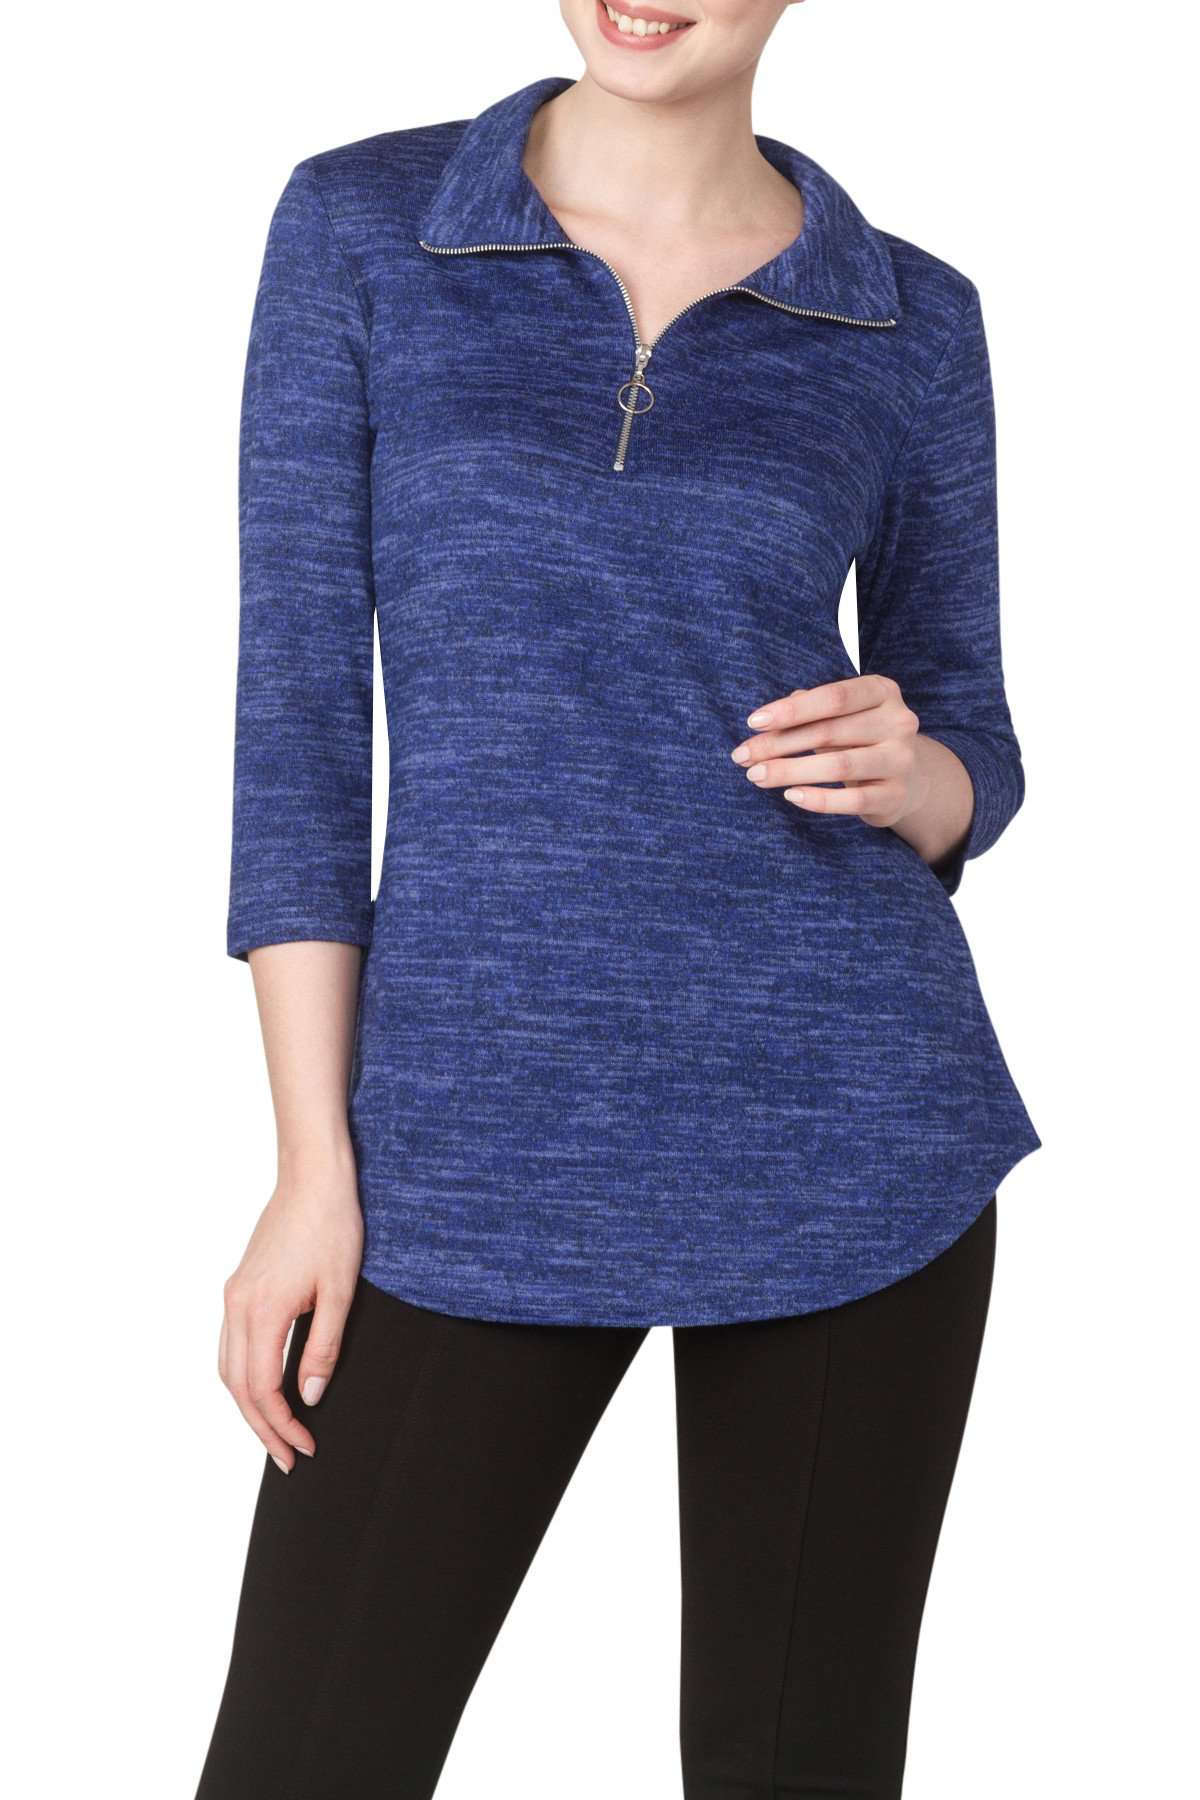 Women's Sweaters Blue Quality Knit Fabric Zipper Front Detail on Sale Now Made in Canada - Yvonne Marie - Yvonne Marie